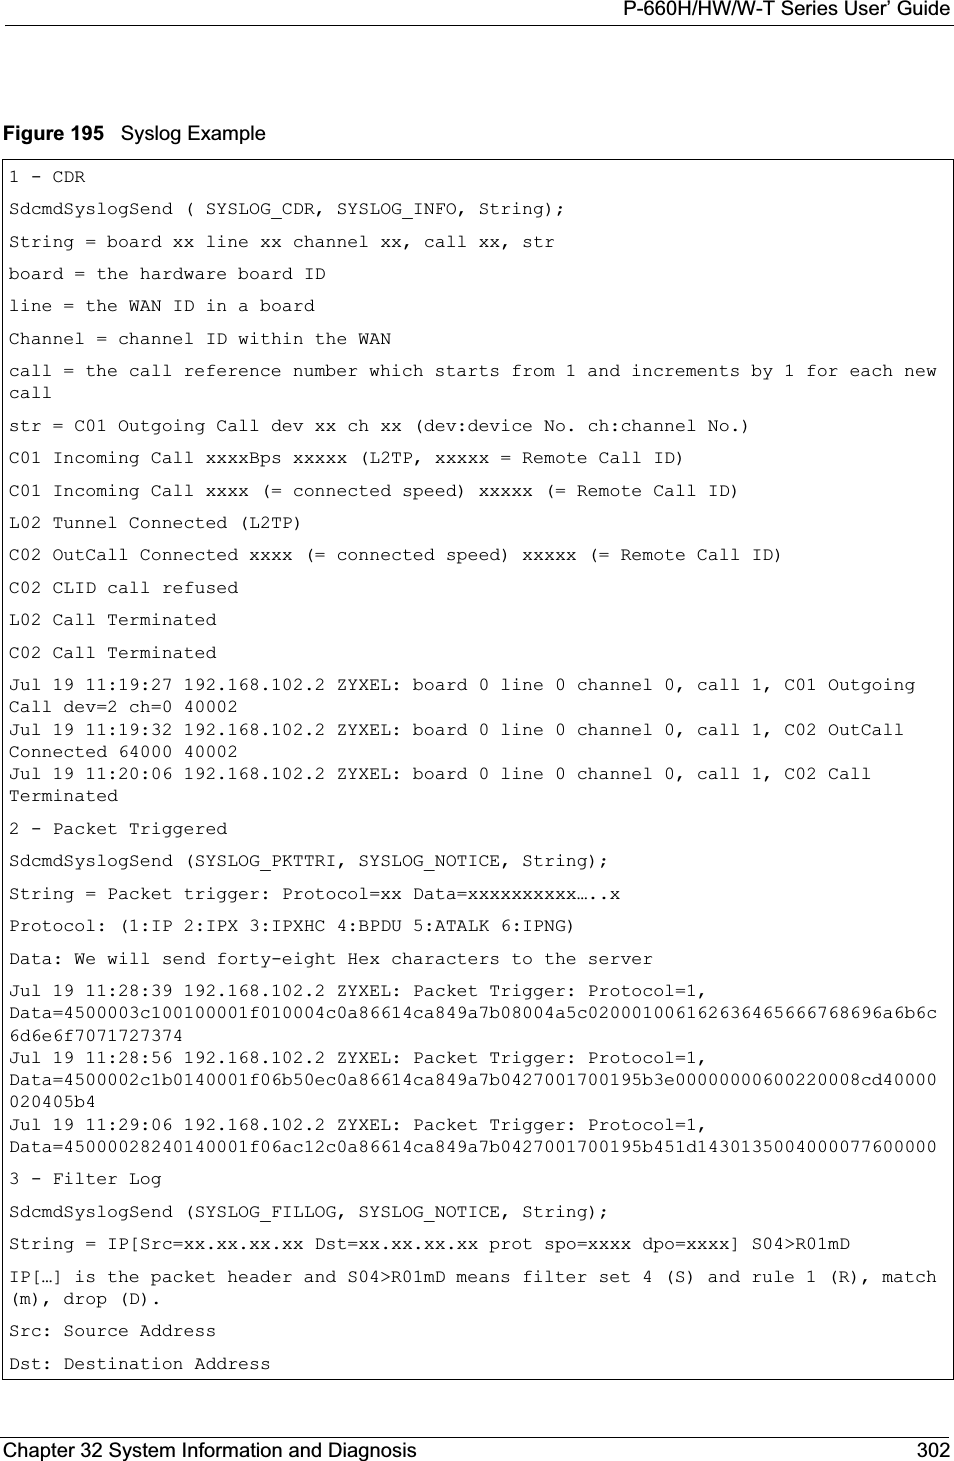 P-660H/HW/W-T Series User’ GuideChapter 32 System Information and Diagnosis 302Figure 195   Syslog Example1 - CDRSdcmdSyslogSend ( SYSLOG_CDR, SYSLOG_INFO, String);String = board xx line xx channel xx, call xx, strboard = the hardware board IDline = the WAN ID in a boardChannel = channel ID within the WANcall = the call reference number which starts from 1 and increments by 1 for each new callstr = C01 Outgoing Call dev xx ch xx (dev:device No. ch:channel No.)C01 Incoming Call xxxxBps xxxxx (L2TP, xxxxx = Remote Call ID)C01 Incoming Call xxxx (= connected speed) xxxxx (= Remote Call ID)L02 Tunnel Connected (L2TP)C02 OutCall Connected xxxx (= connected speed) xxxxx (= Remote Call ID)C02 CLID call refusedL02 Call TerminatedC02 Call TerminatedJul 19 11:19:27 192.168.102.2 ZYXEL: board 0 line 0 channel 0, call 1, C01 Outgoing Call dev=2 ch=0 40002Jul 19 11:19:32 192.168.102.2 ZYXEL: board 0 line 0 channel 0, call 1, C02 OutCall Connected 64000 40002Jul 19 11:20:06 192.168.102.2 ZYXEL: board 0 line 0 channel 0, call 1, C02 Call Terminated2 - Packet TriggeredSdcmdSyslogSend (SYSLOG_PKTTRI, SYSLOG_NOTICE, String);String = Packet trigger: Protocol=xx Data=xxxxxxxxxx…..xProtocol: (1:IP 2:IPX 3:IPXHC 4:BPDU 5:ATALK 6:IPNG)Data: We will send forty-eight Hex characters to the serverJul 19 11:28:39 192.168.102.2 ZYXEL: Packet Trigger: Protocol=1, Data=4500003c100100001f010004c0a86614ca849a7b08004a5c020001006162636465666768696a6b6c6d6e6f7071727374Jul 19 11:28:56 192.168.102.2 ZYXEL: Packet Trigger: Protocol=1, Data=4500002c1b0140001f06b50ec0a86614ca849a7b0427001700195b3e00000000600220008cd40000020405b4Jul 19 11:29:06 192.168.102.2 ZYXEL: Packet Trigger: Protocol=1, Data=45000028240140001f06ac12c0a86614ca849a7b0427001700195b451d14301350040000776000003 - Filter LogSdcmdSyslogSend (SYSLOG_FILLOG, SYSLOG_NOTICE, String);String = IP[Src=xx.xx.xx.xx Dst=xx.xx.xx.xx prot spo=xxxx dpo=xxxx] S04&gt;R01mDIP[…] is the packet header and S04&gt;R01mD means filter set 4 (S) and rule 1 (R), match (m), drop (D).Src: Source AddressDst: Destination Address